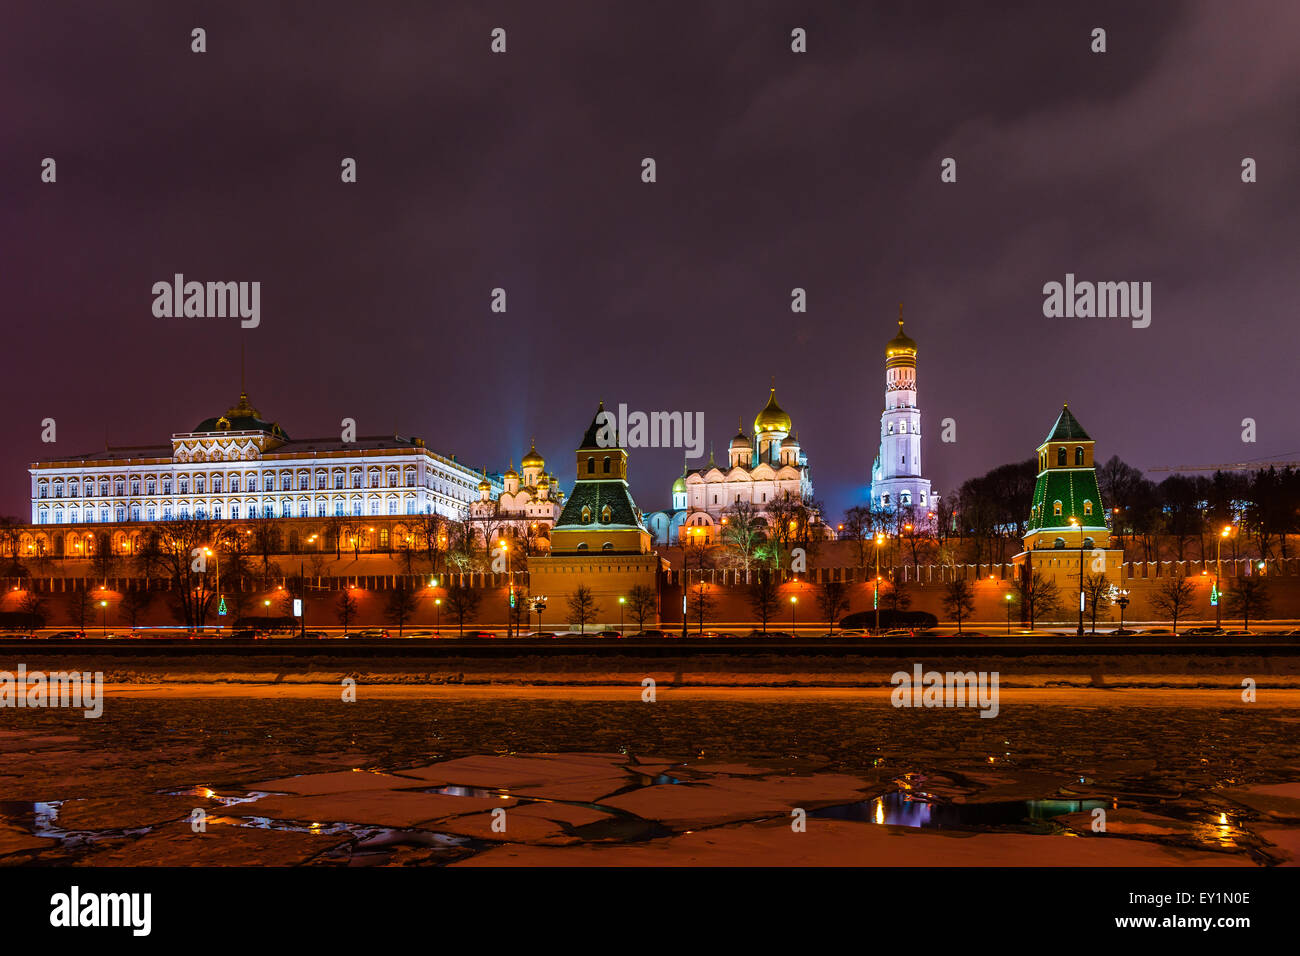 Grand Kremlin palace and cathedrals at winter night. The Moscow river and the Kremlin embankment. Stock Photo